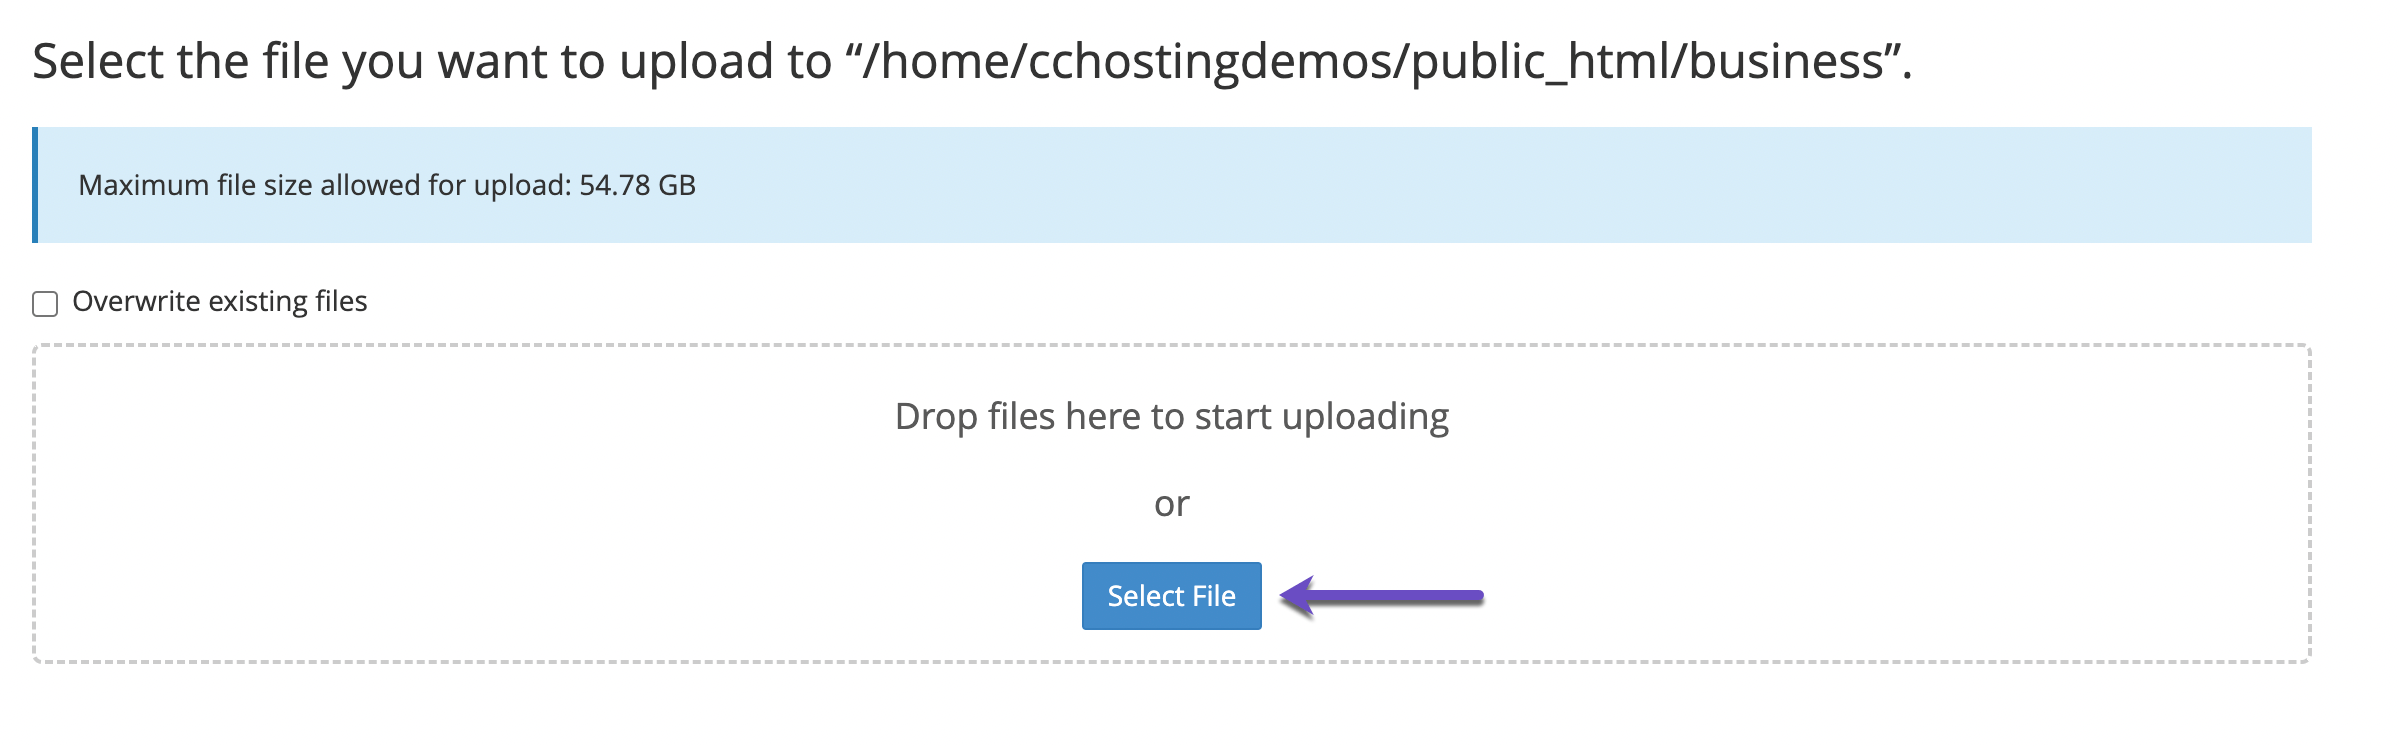 File Manager Select File